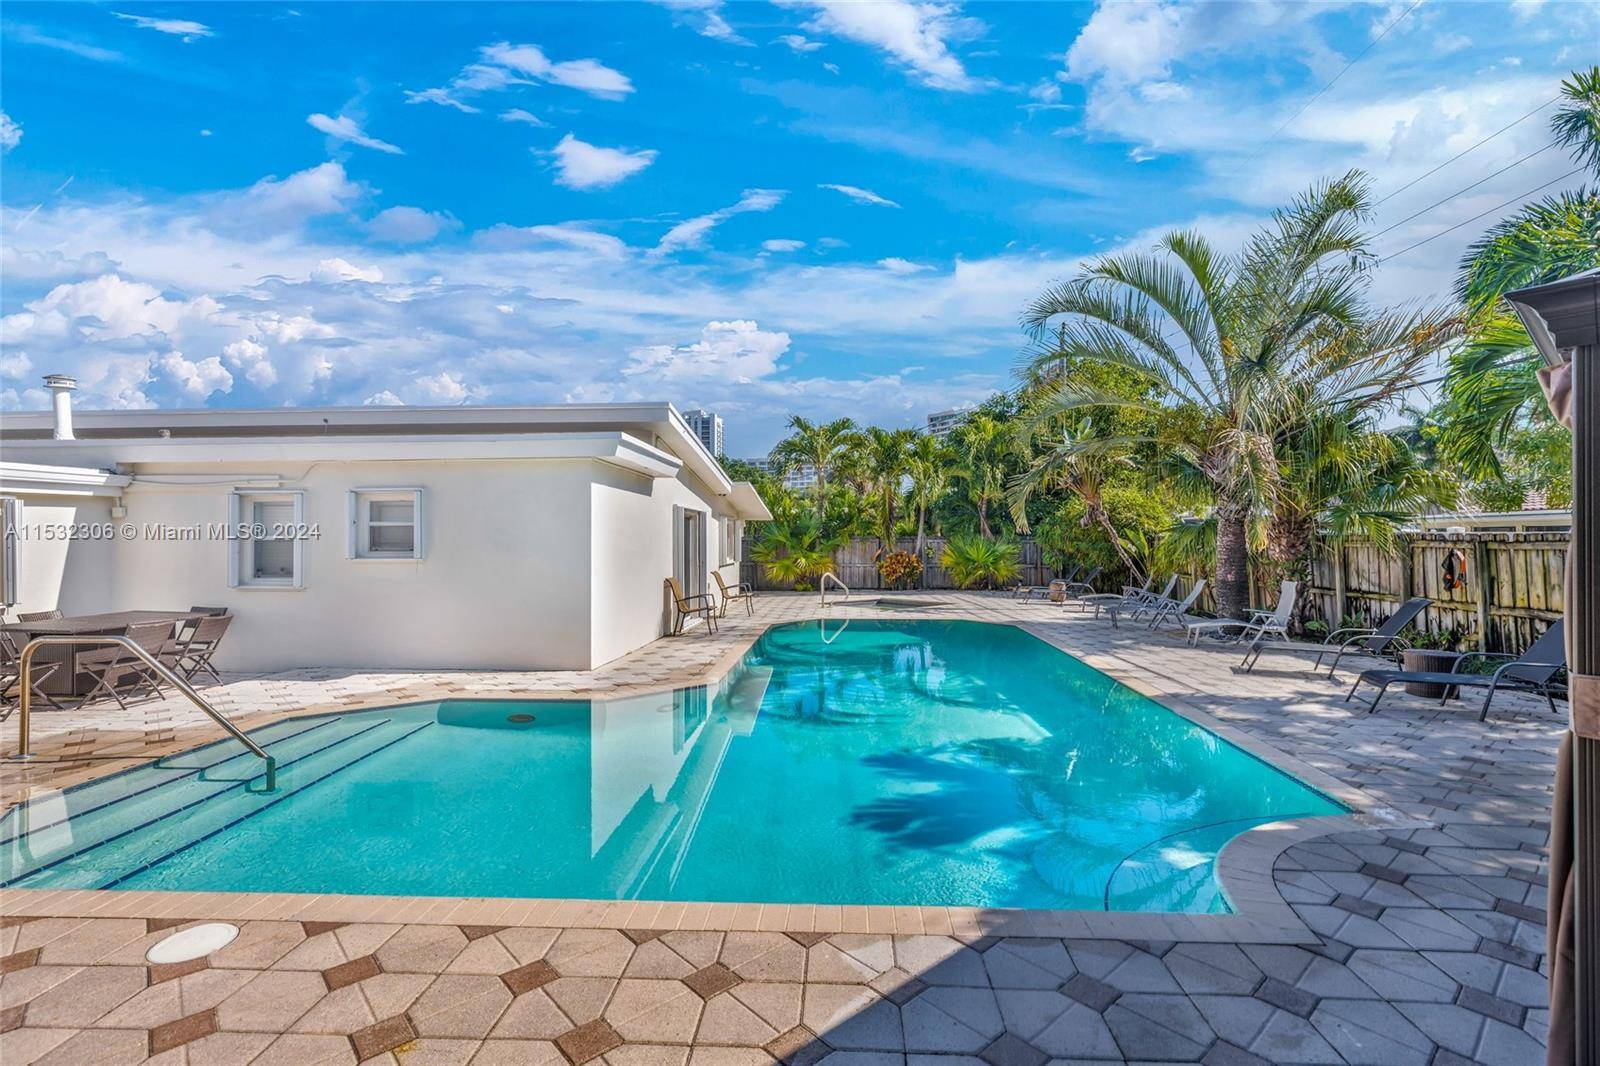 Escape to paradise in this stunning 4 bedroom, 2.